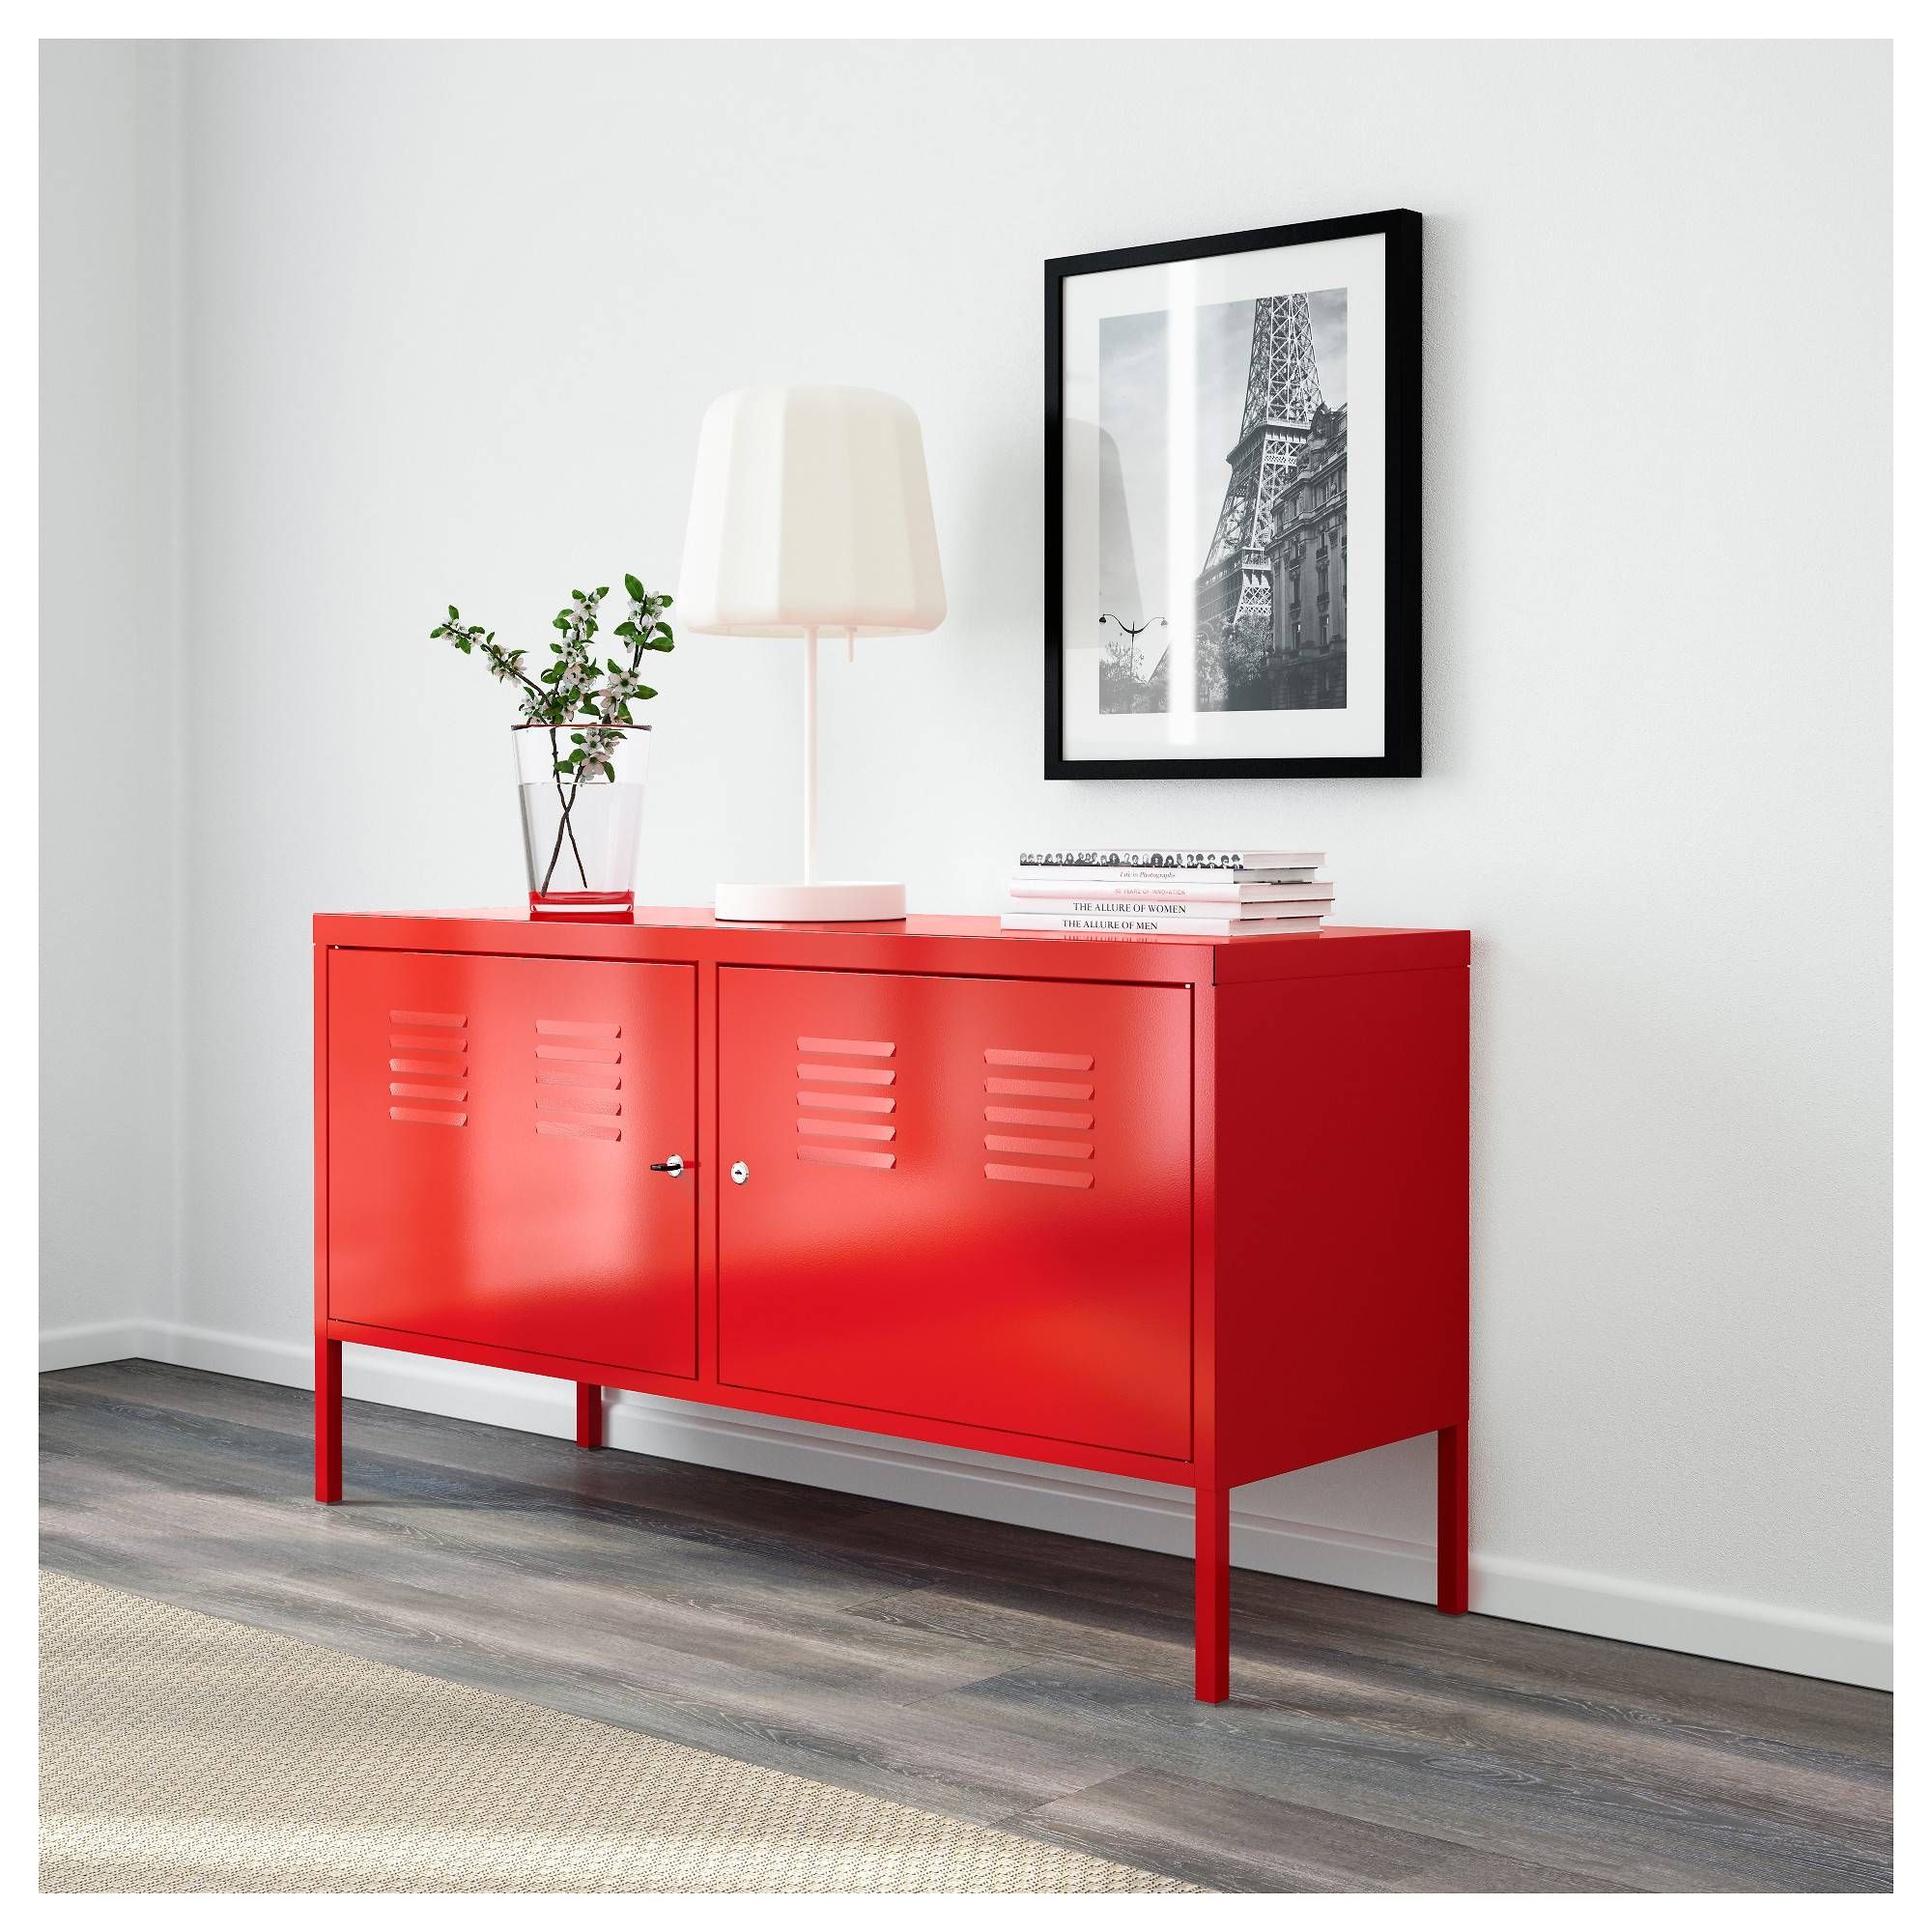 Ikea Ps Cabinet – Red – Ikea Within Most Recent Ikea Red Sideboards (View 3 of 15)